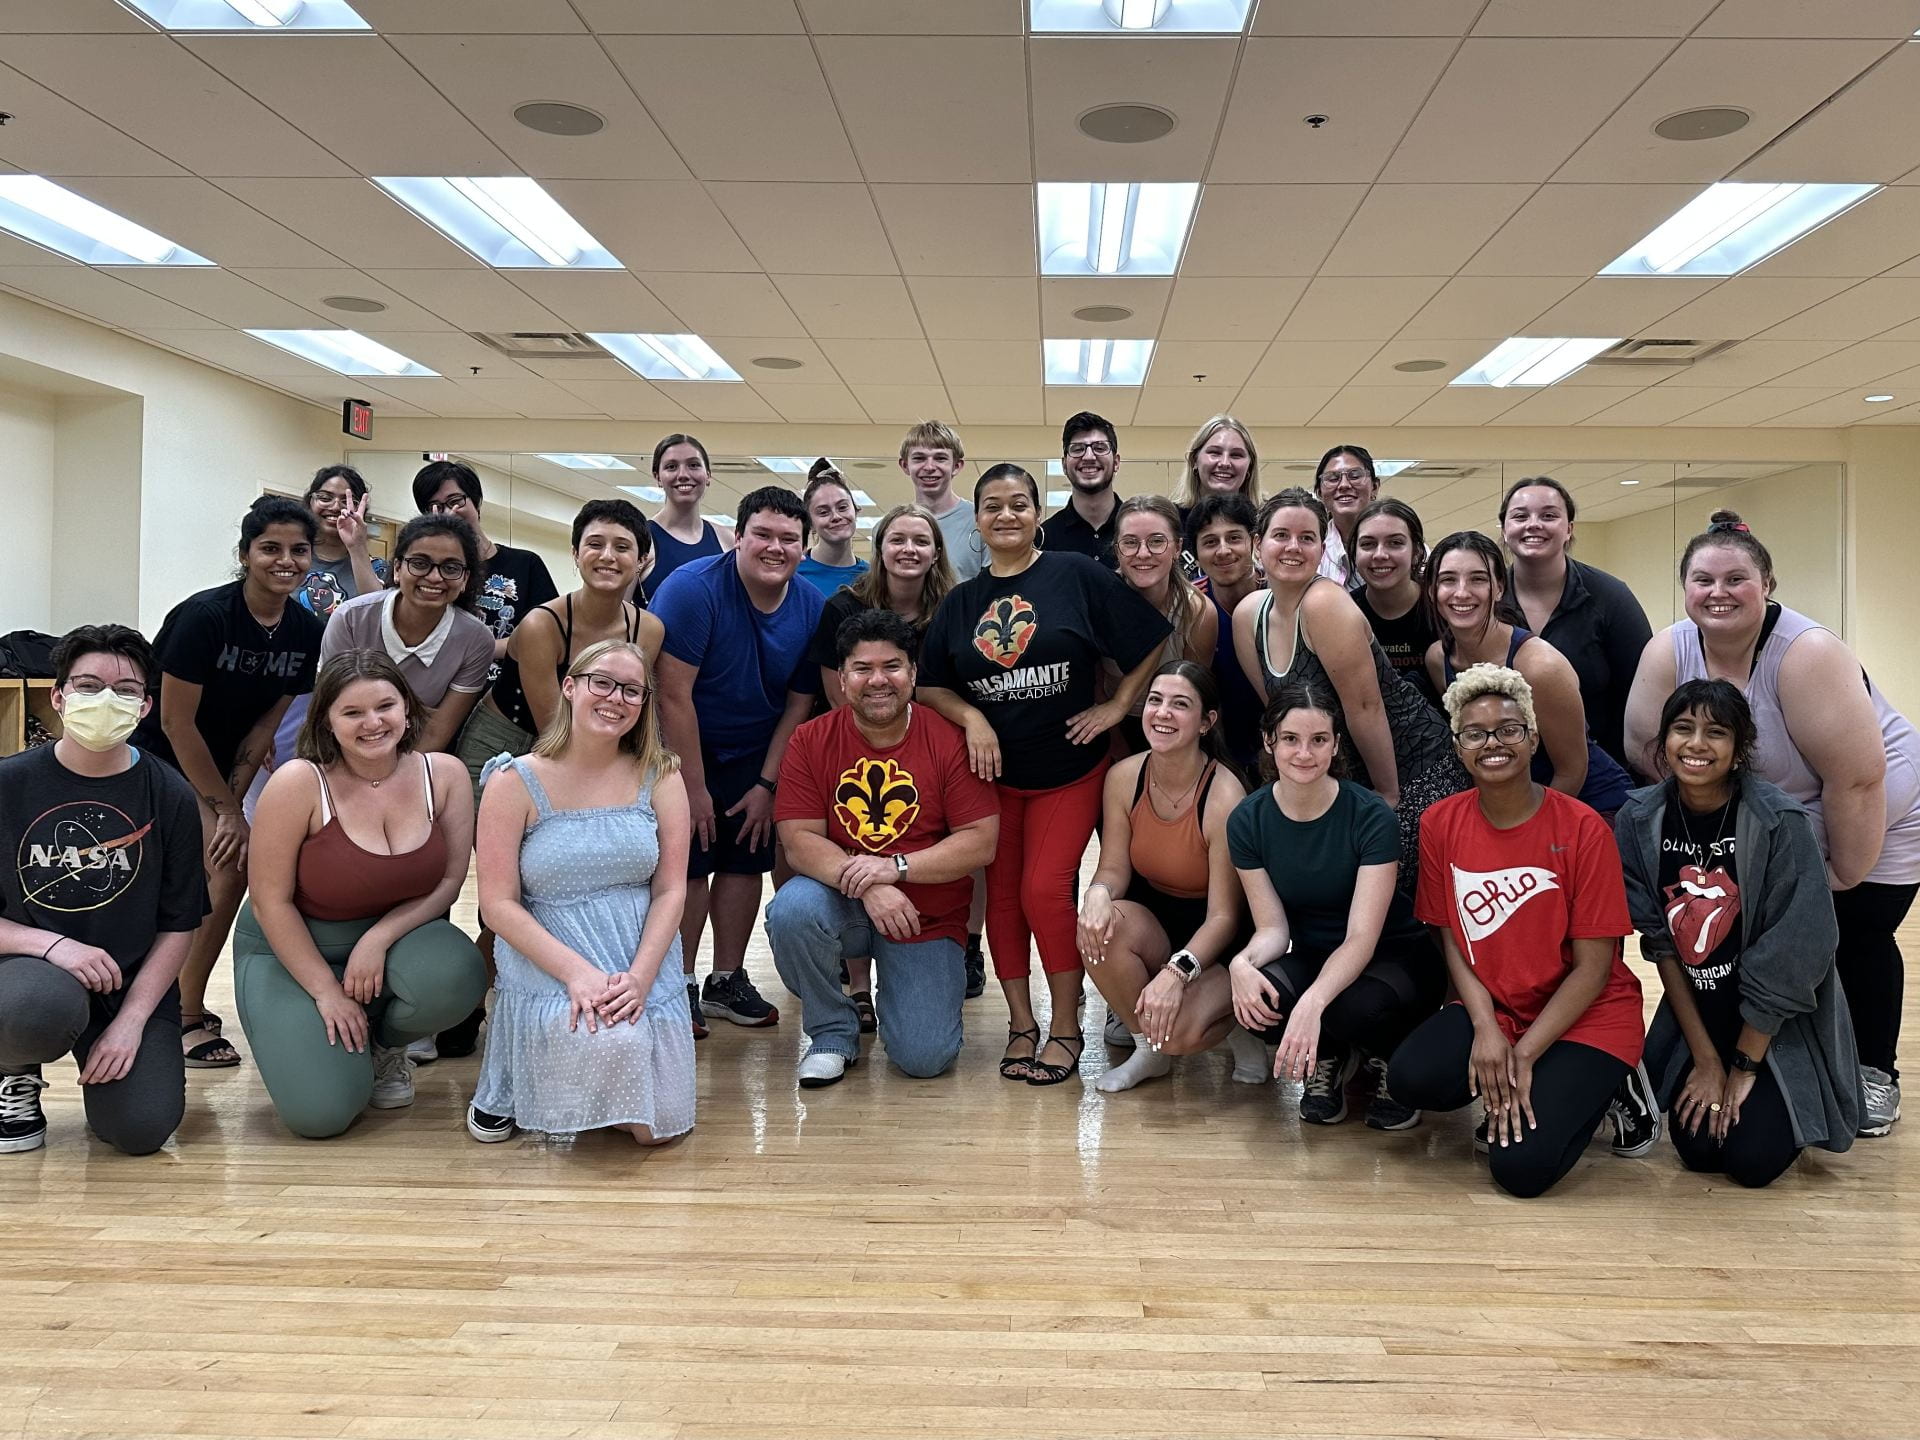 Dance Coalition at The Ohio State University aims to promote inclusion and diversity, as well as create lasting friendships through a shared passion of dance. Credit: Chloe Parker